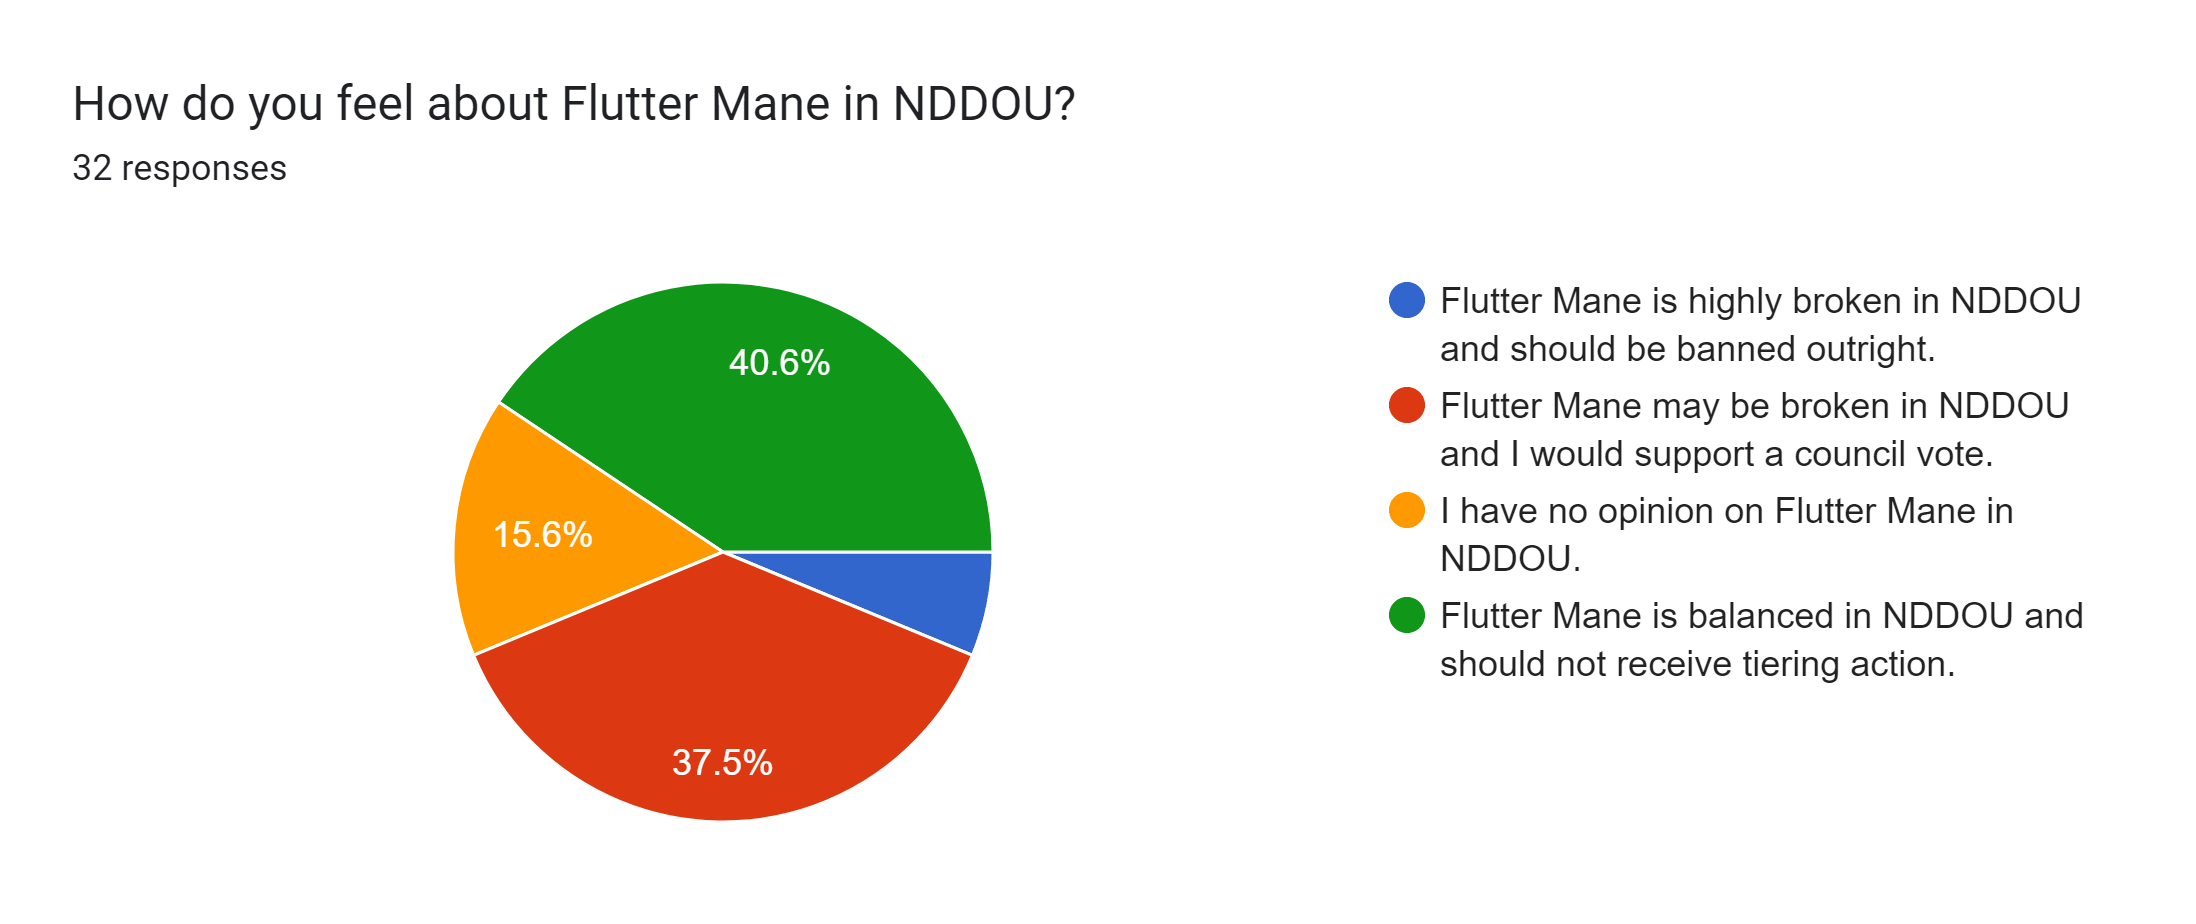 Forms response chart. Question title: How do you feel about Flutter Mane in NDDOU?. Number of responses: 32 responses.